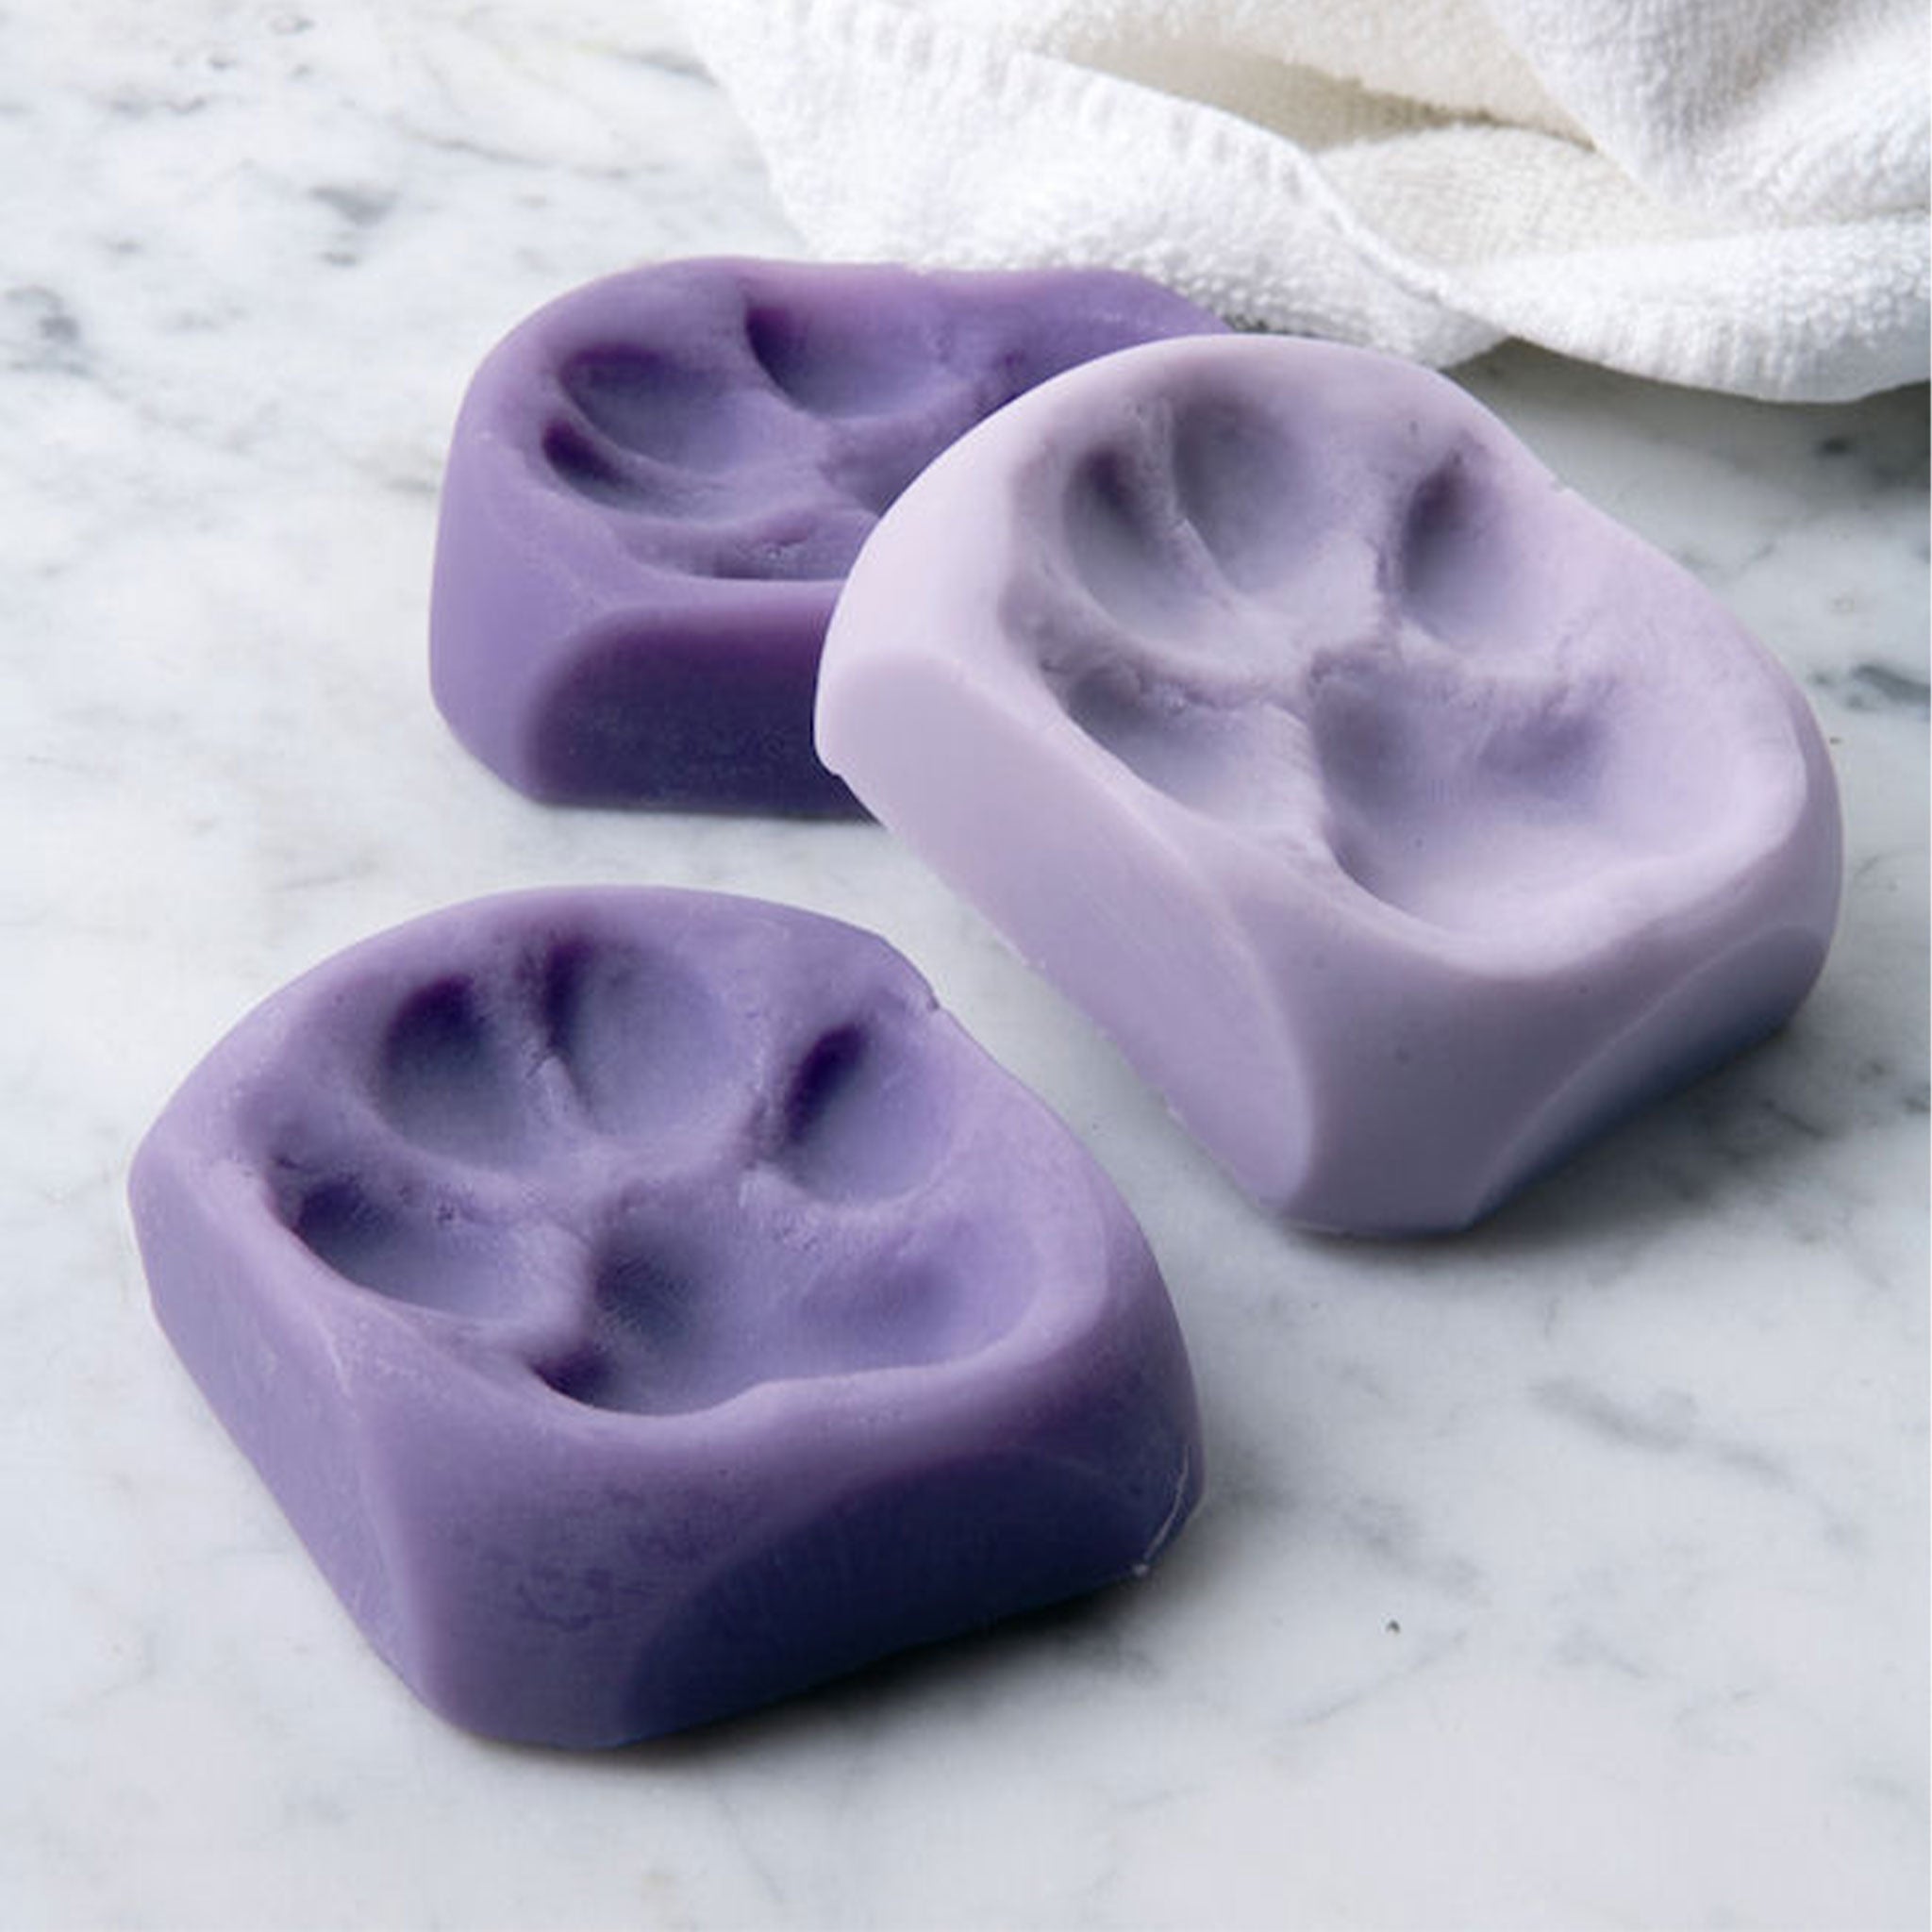 Three pawprint lavender soap bars on a white marble surface.